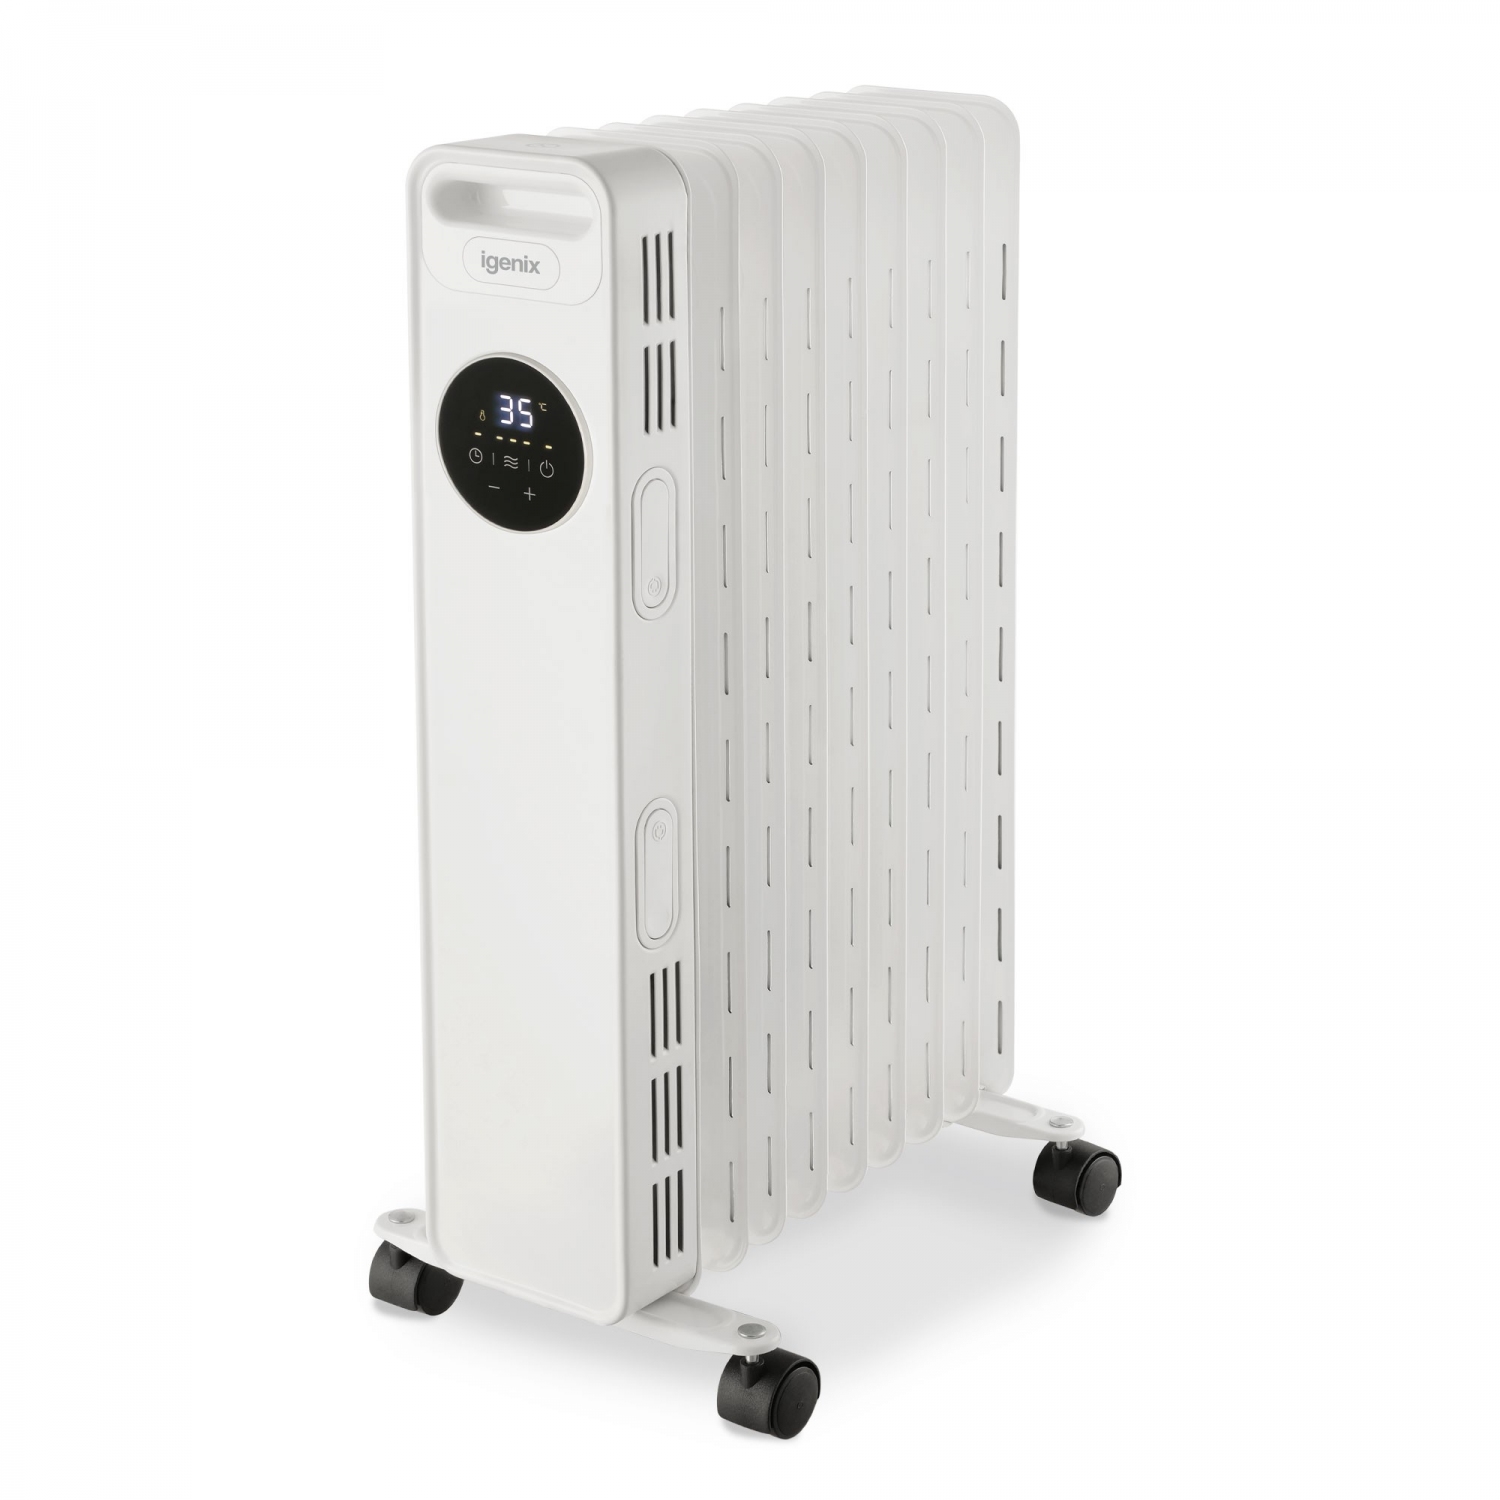 Overheat Protection Grey Electric Heater with 3 Heat Settings 1200 W Adjustable Thermostat Igenix IG1601 Portable Oil Filled Radiator 